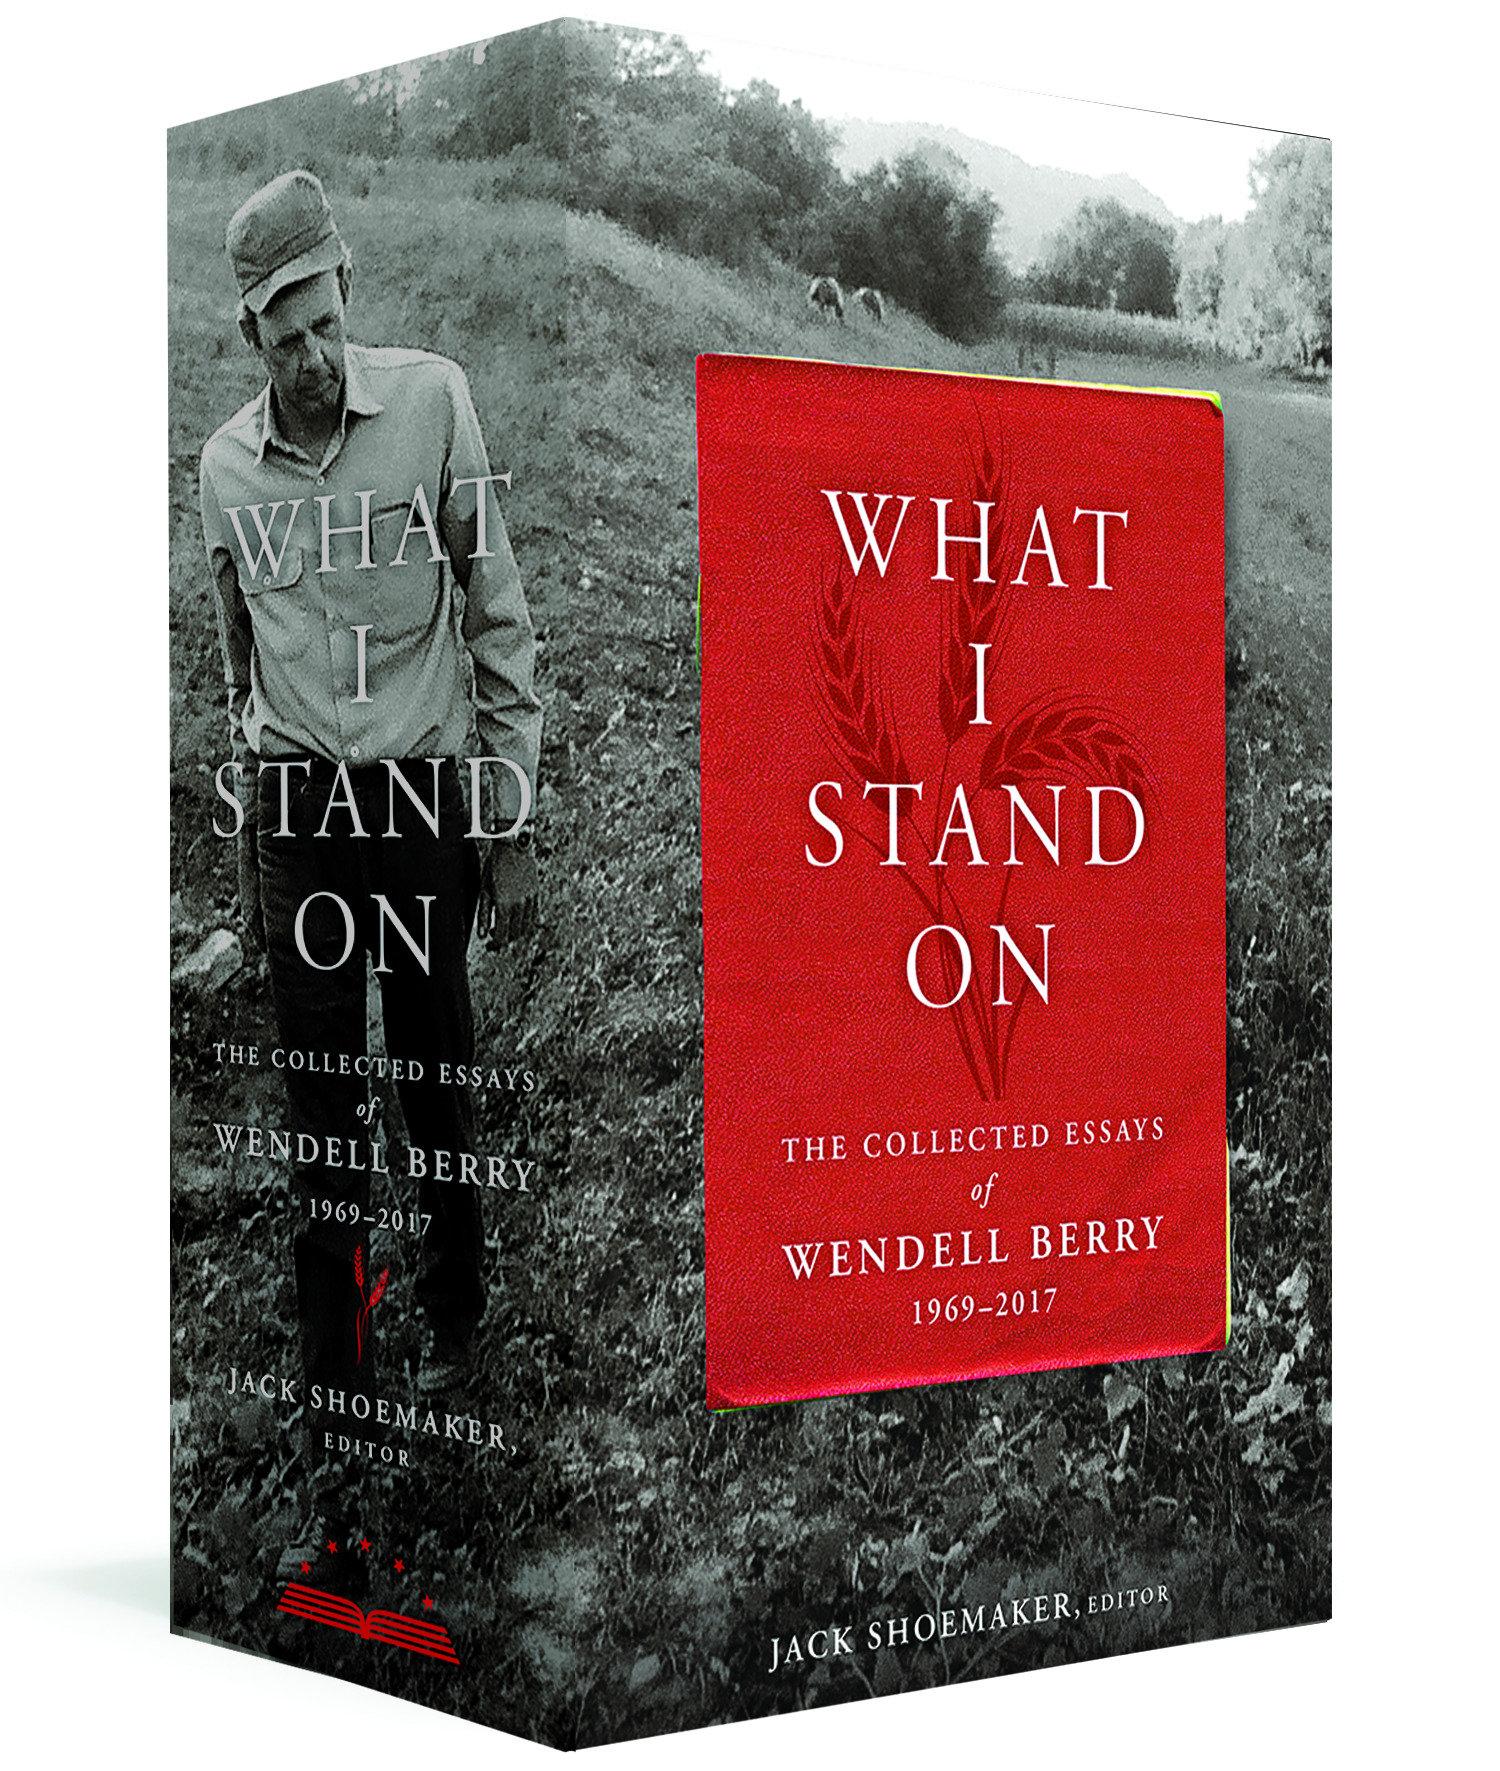 What I Stand On: The Collected Essays of Wendell Berry 1969-2017 - Wendell Berry